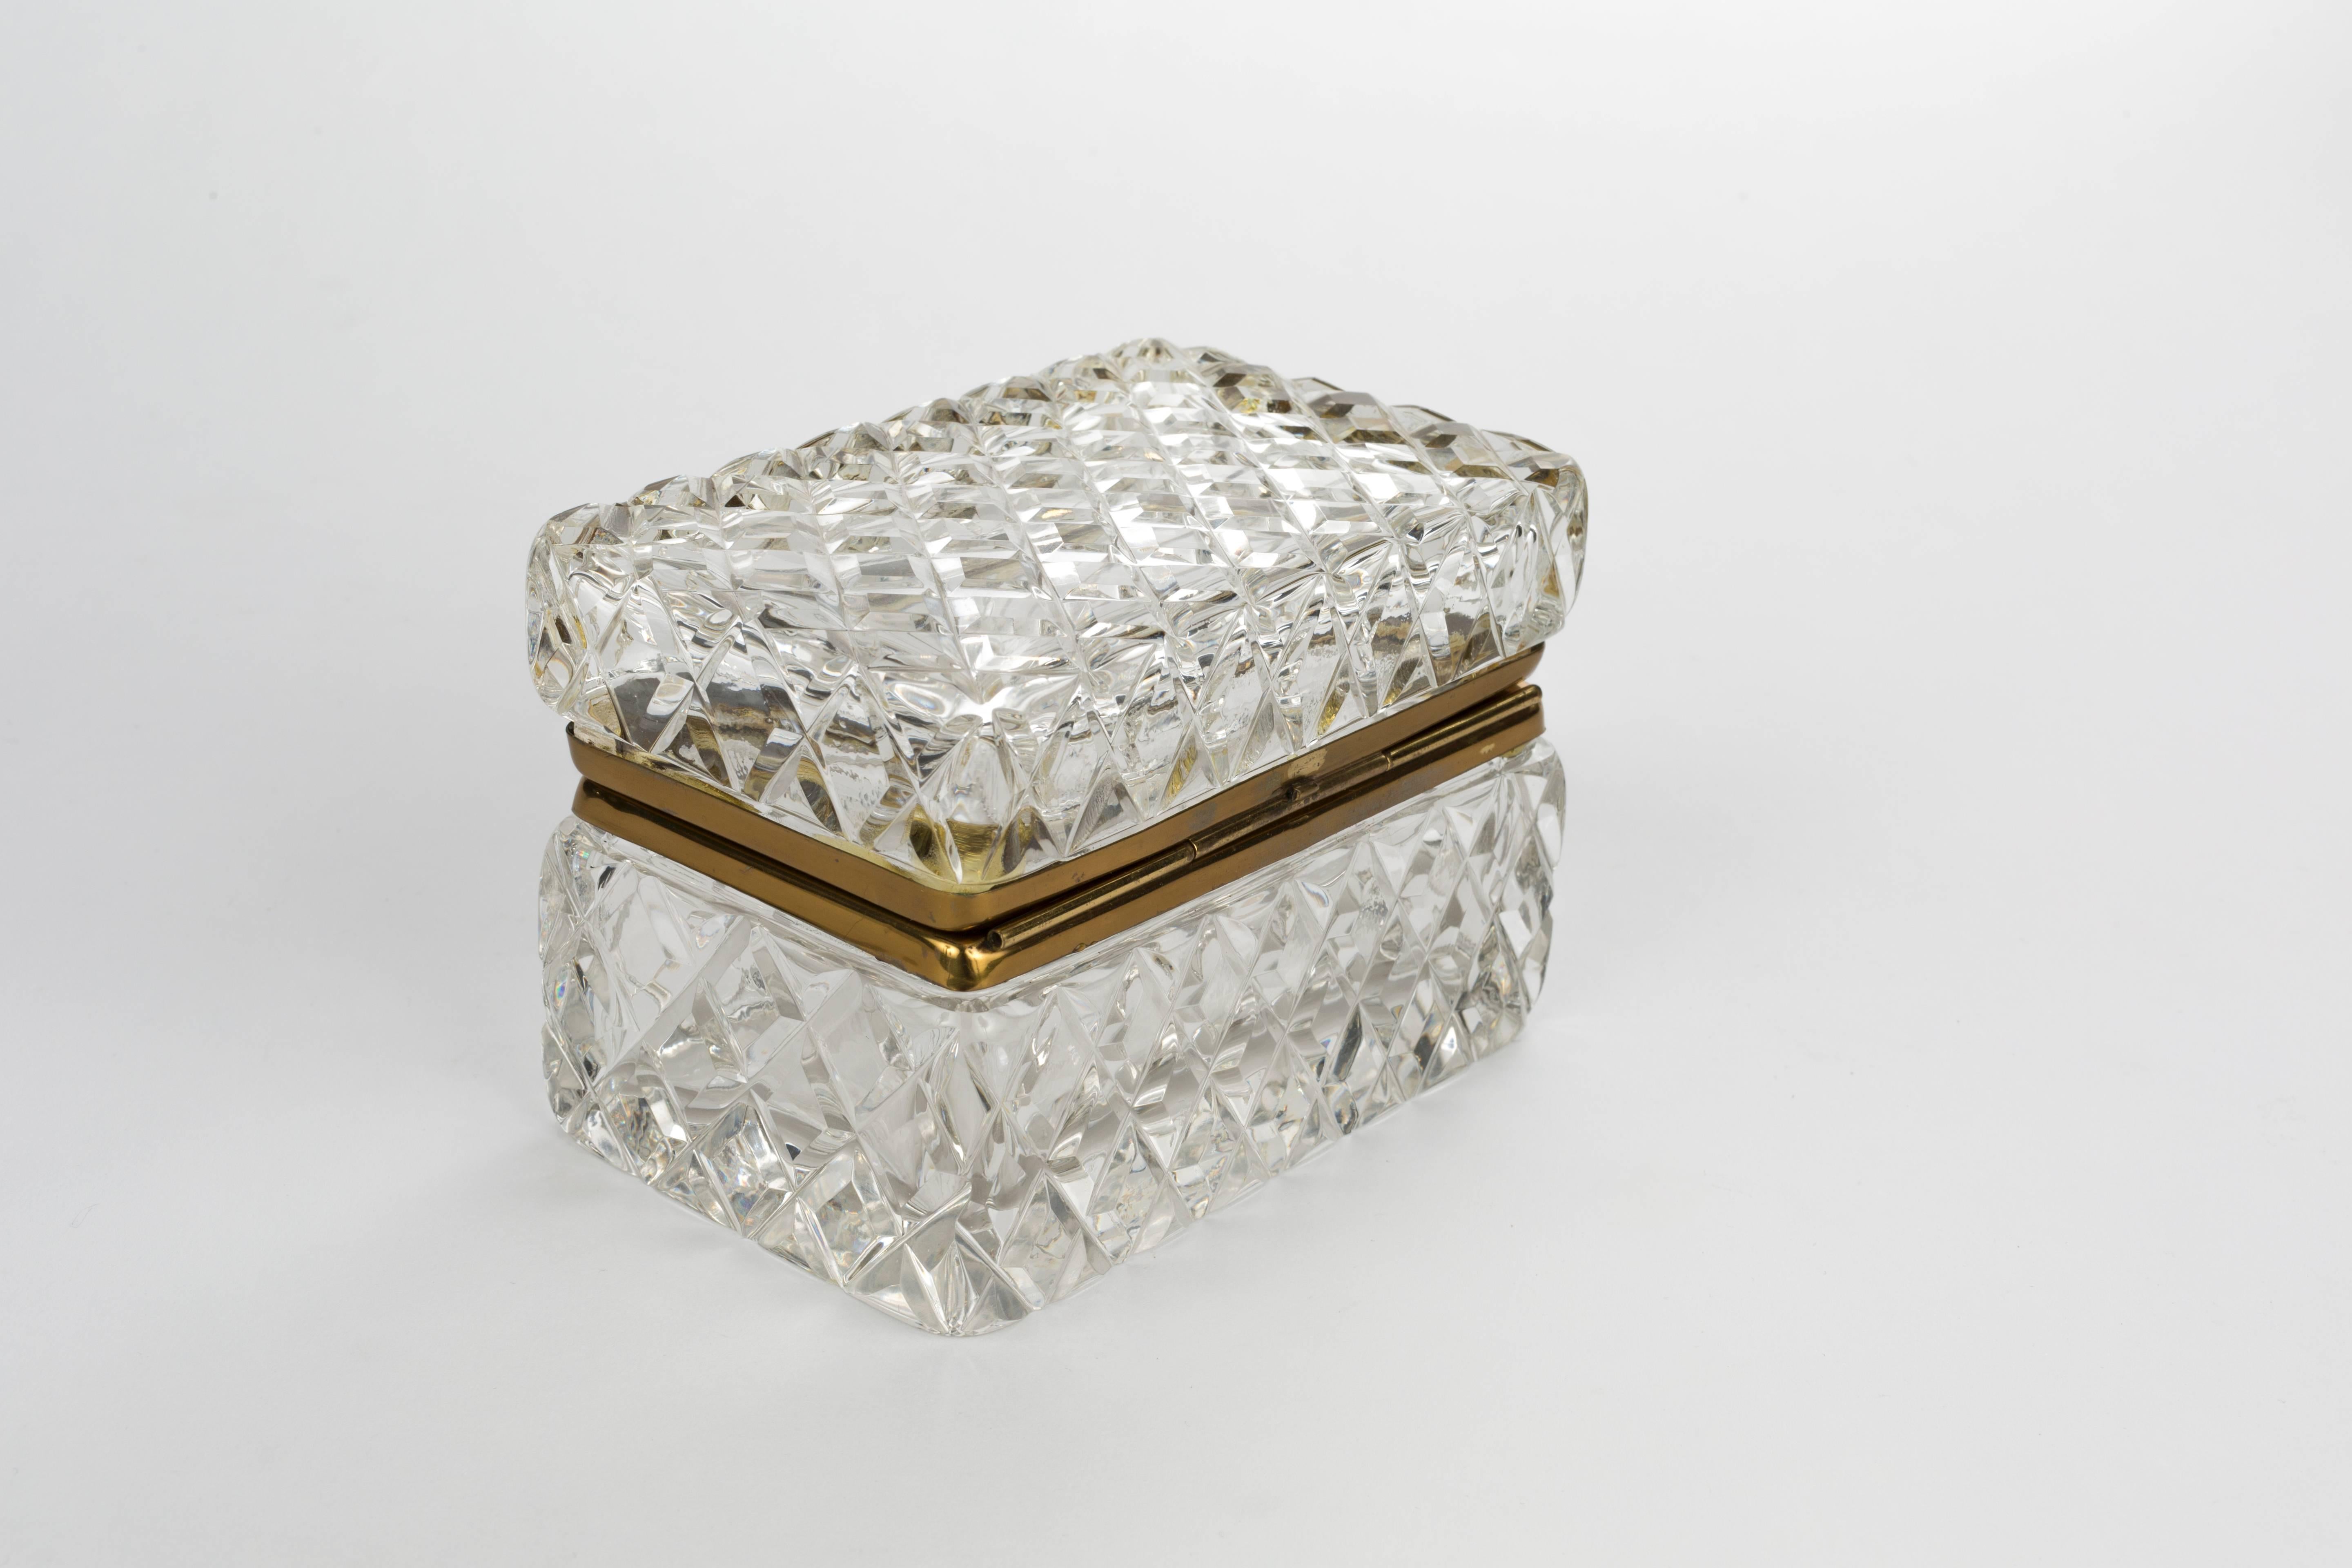 Cut crystal and bronze jewelry casket box possibly Baccarat.